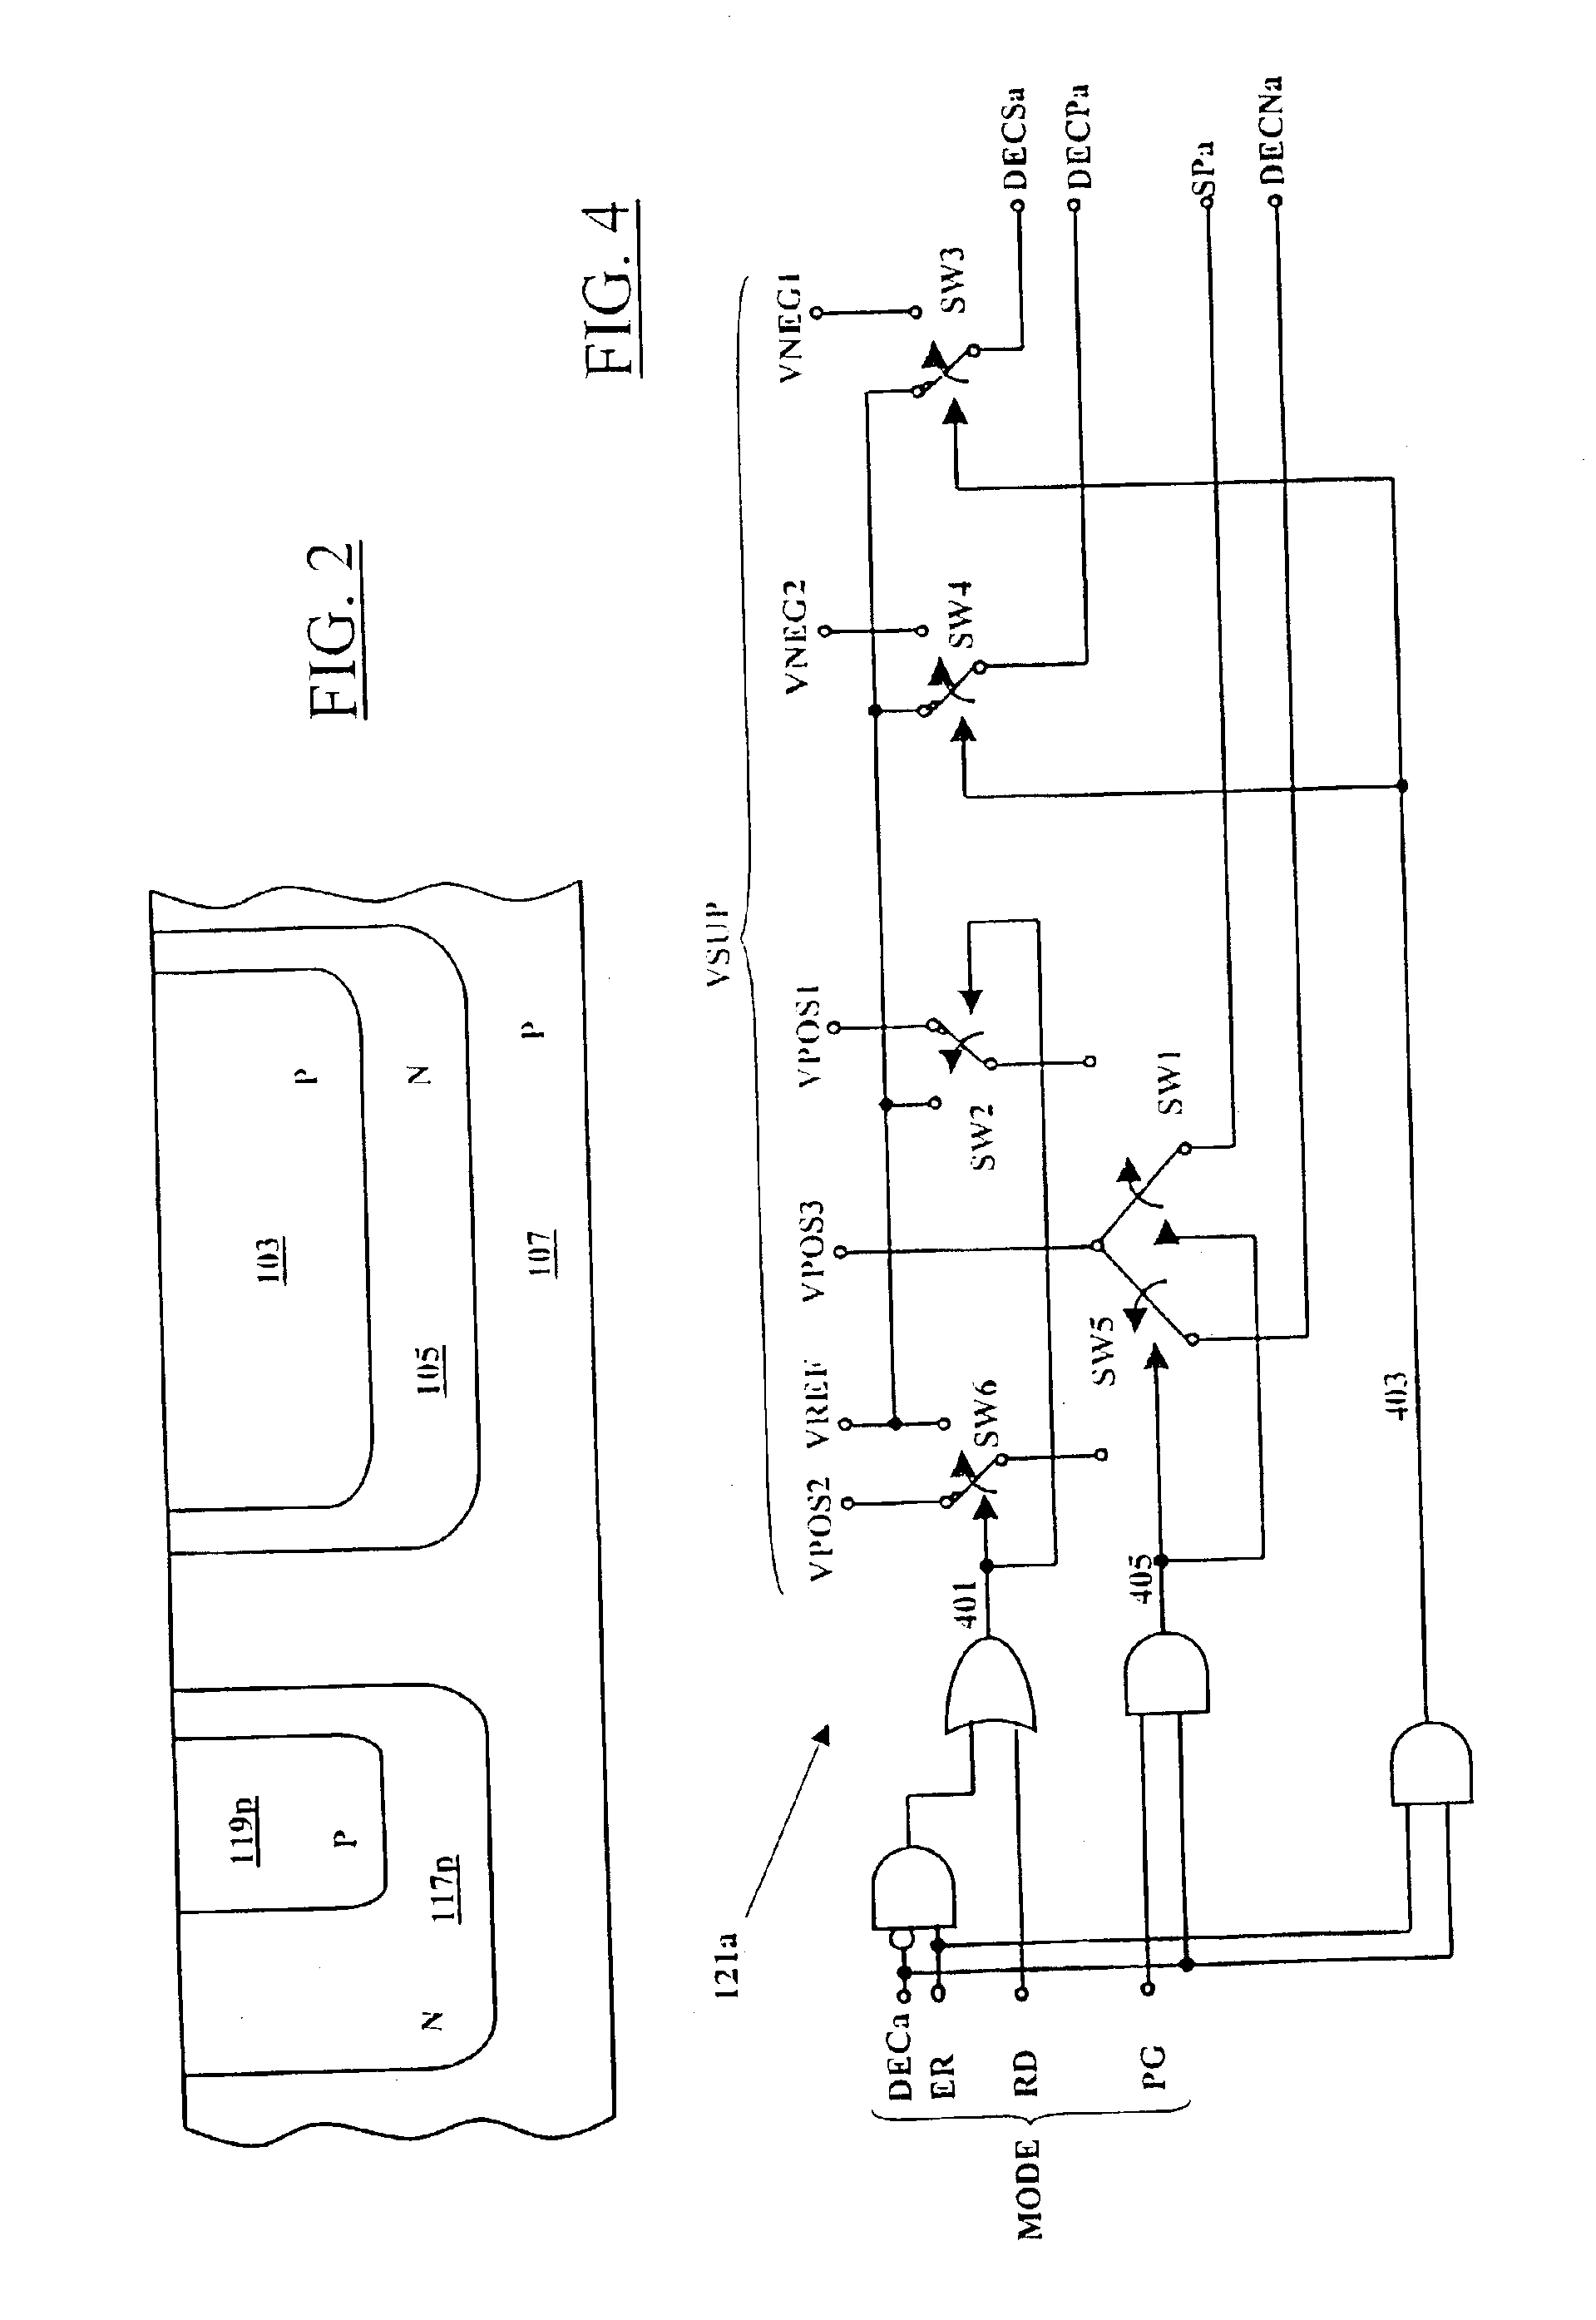 Word line selector for a semiconductor memory